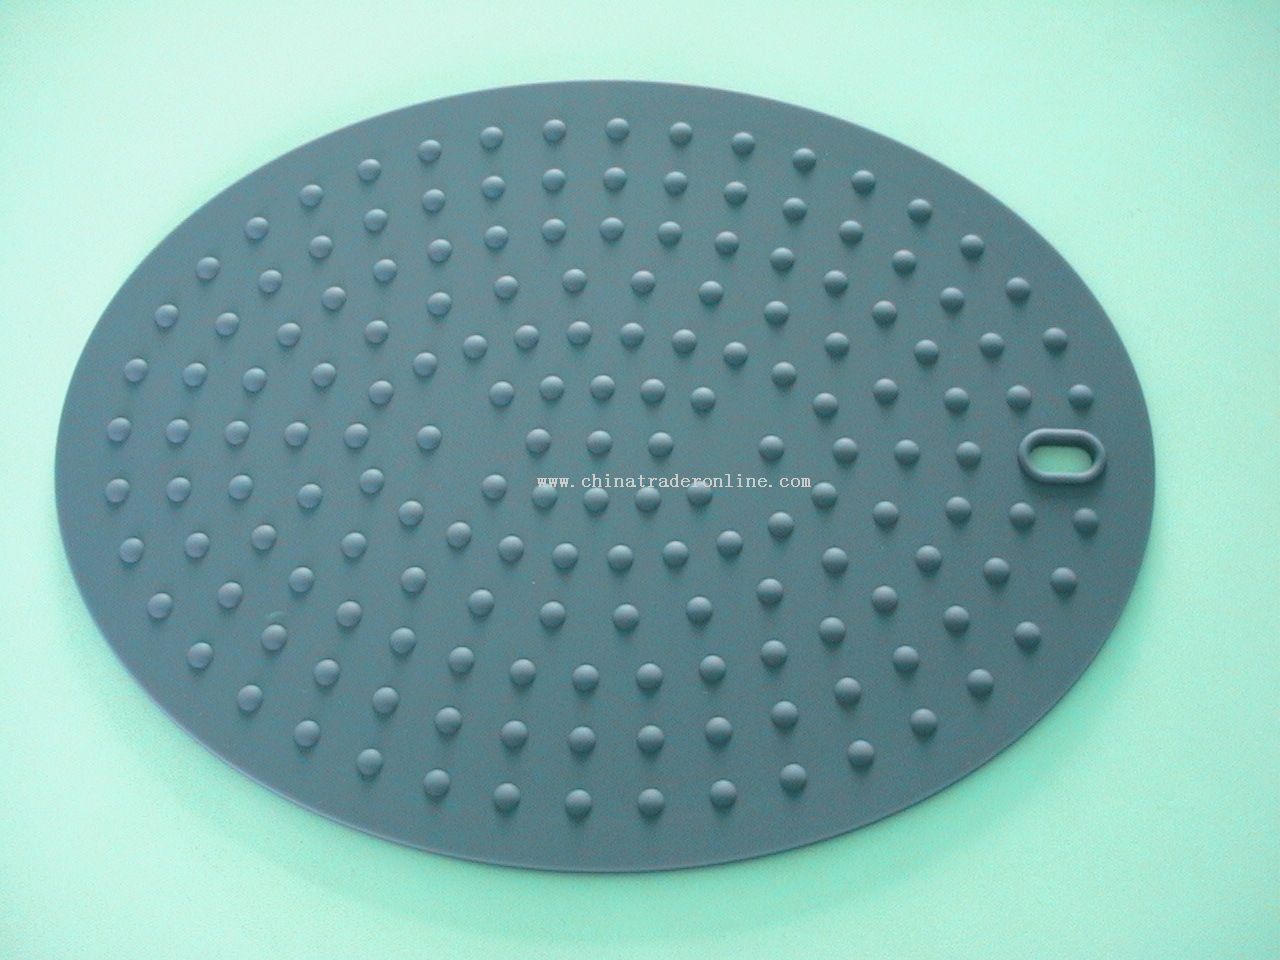 Silicone cup mat from China